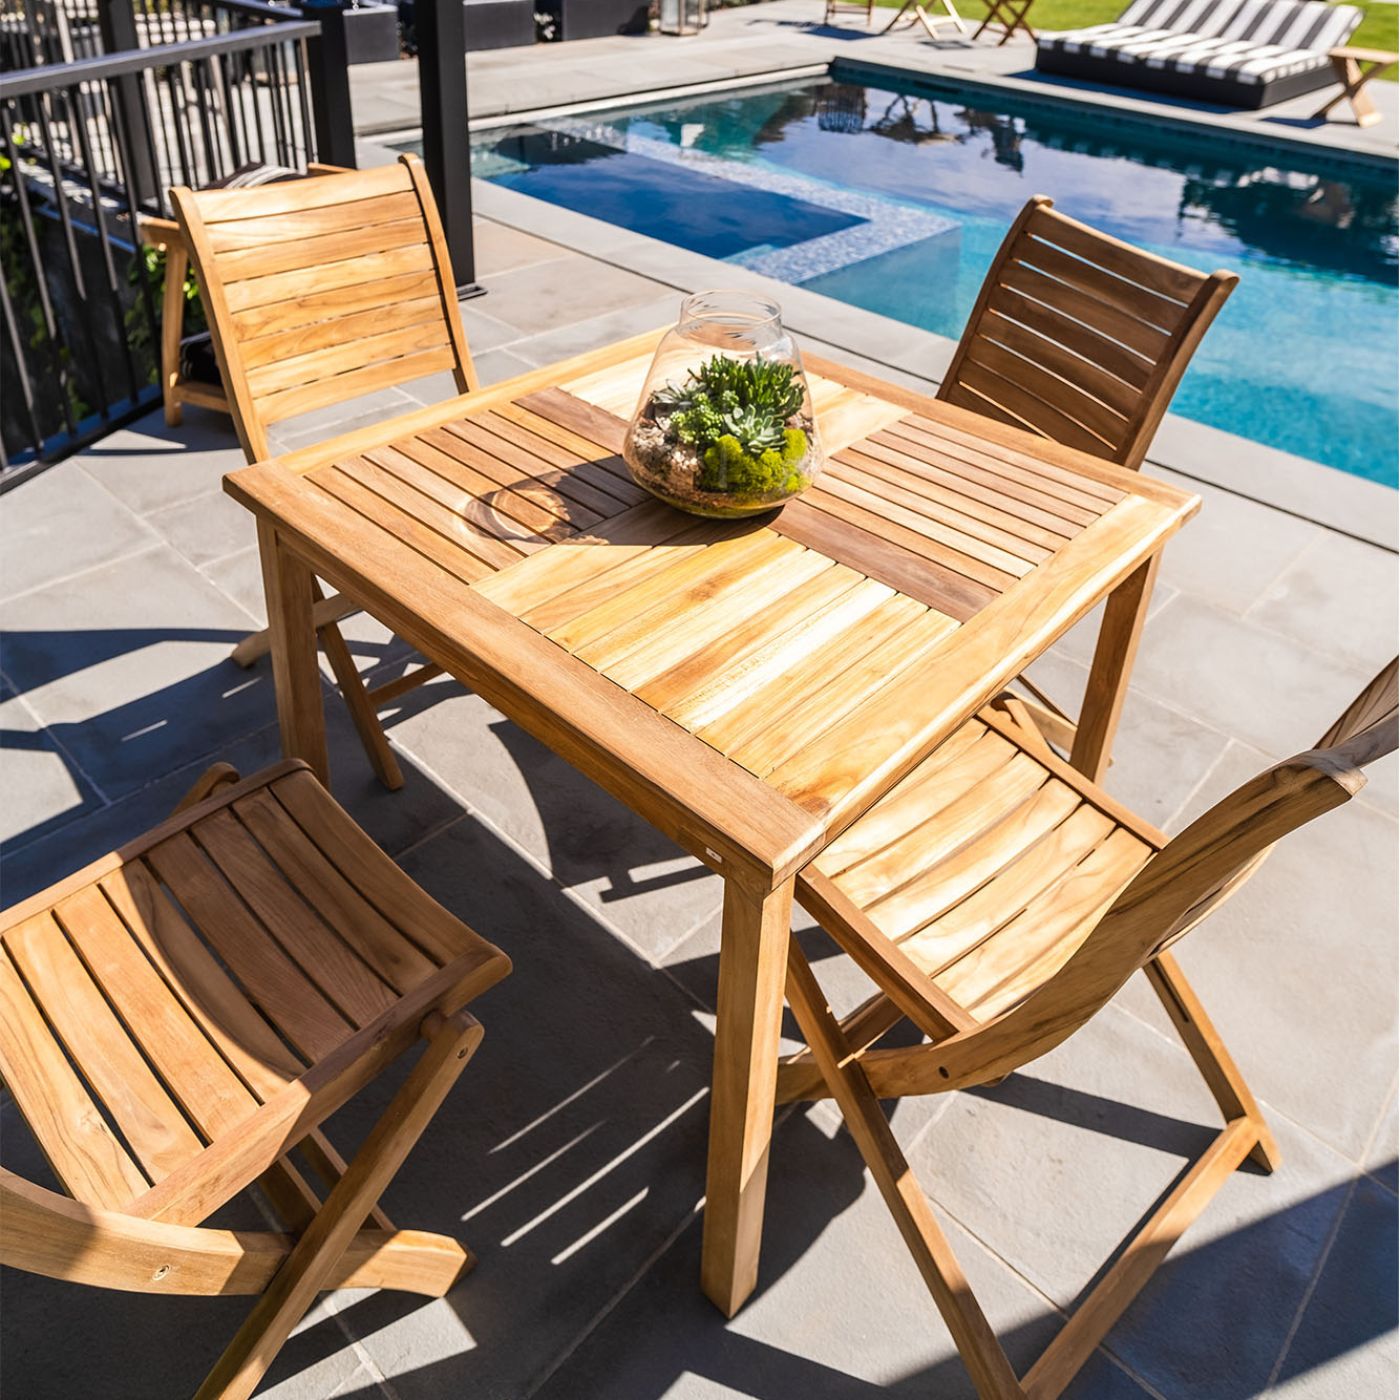 Telluride 4-Person Natural Teak Outdoor Square Dining  Table 39"